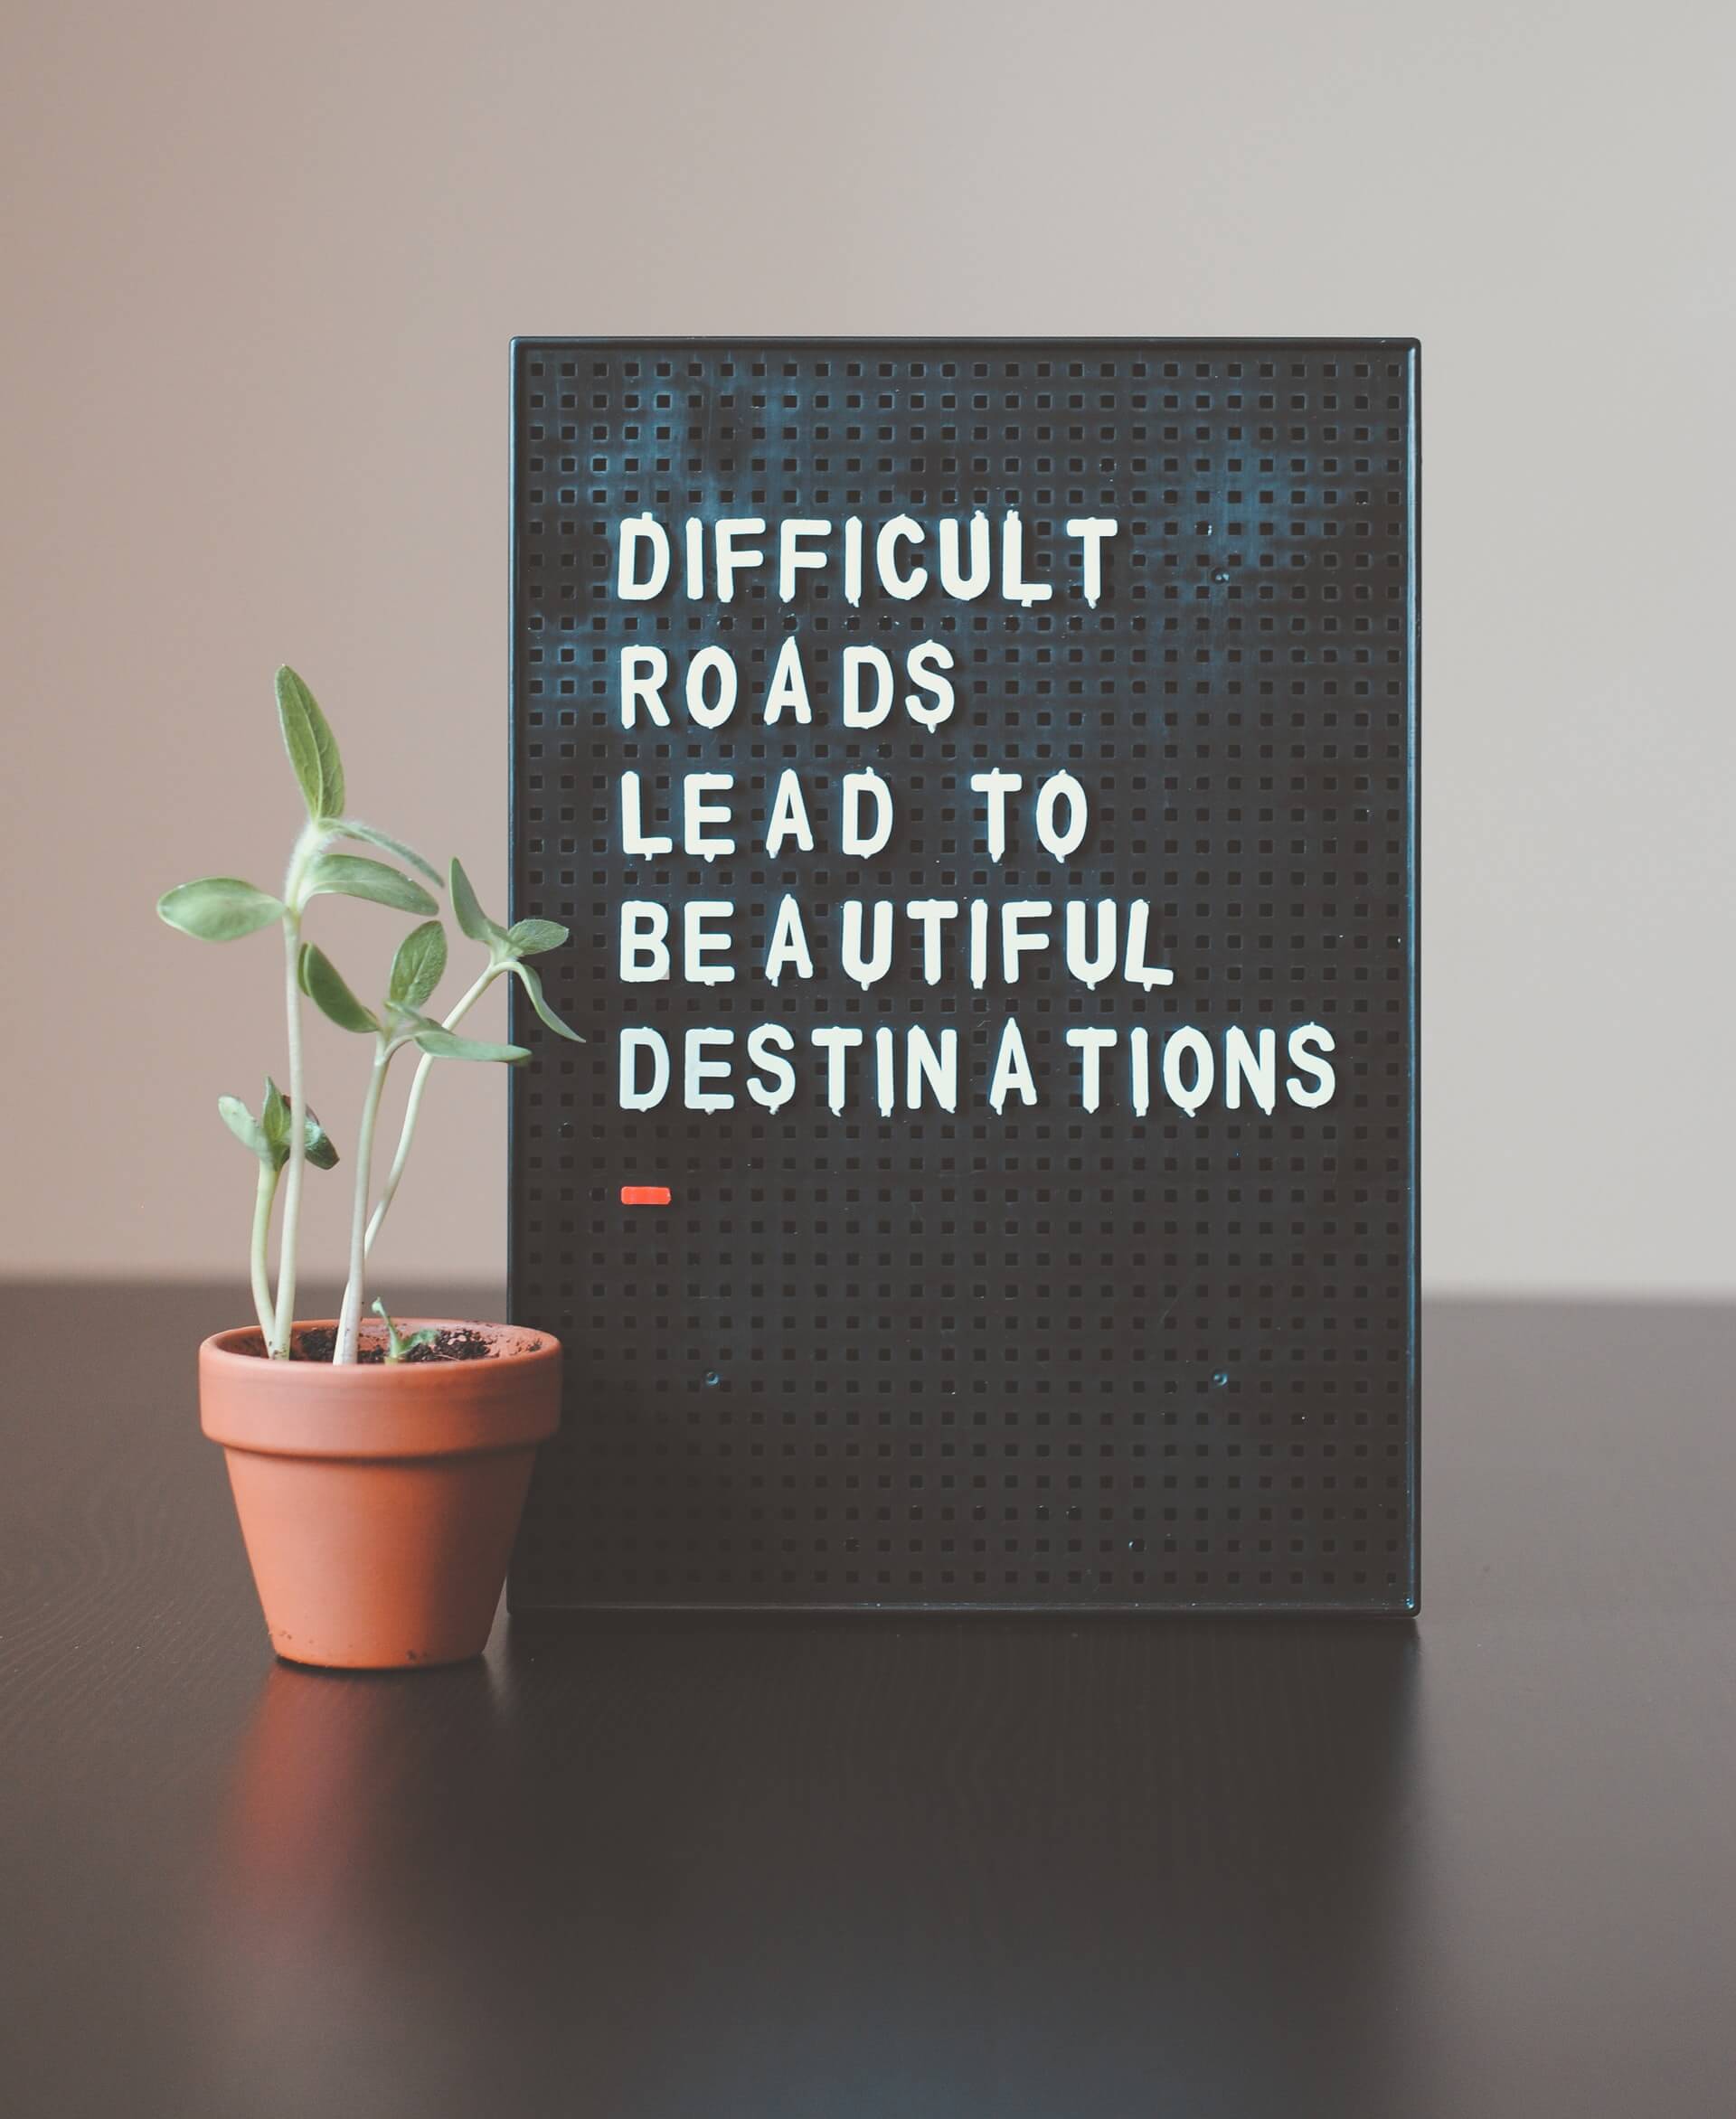 "Difficult roads lead to beautiful destinations" - inspiring quote for travellers